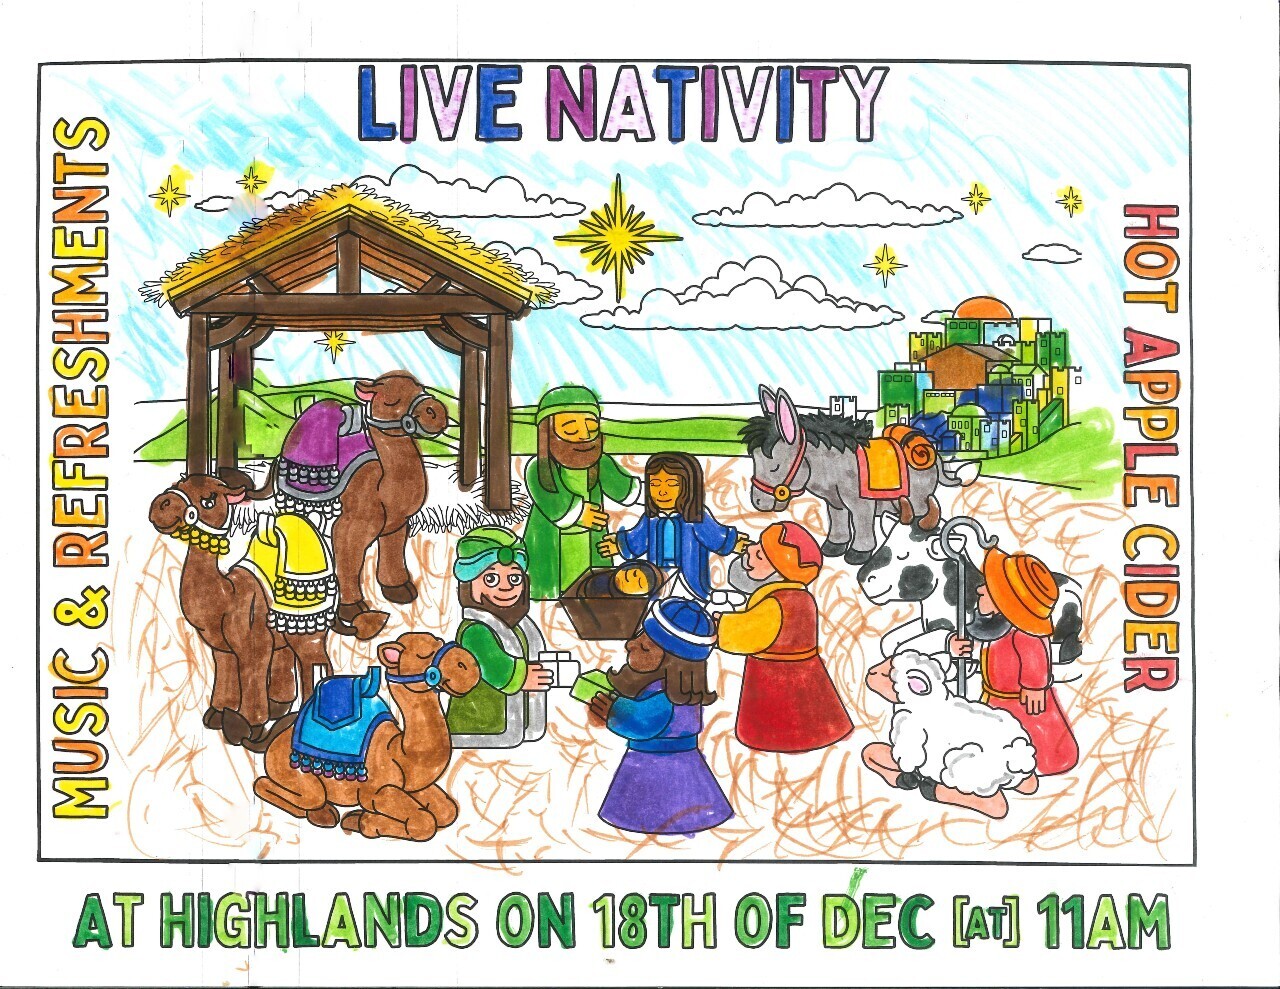 Child colouring of live nativity poster